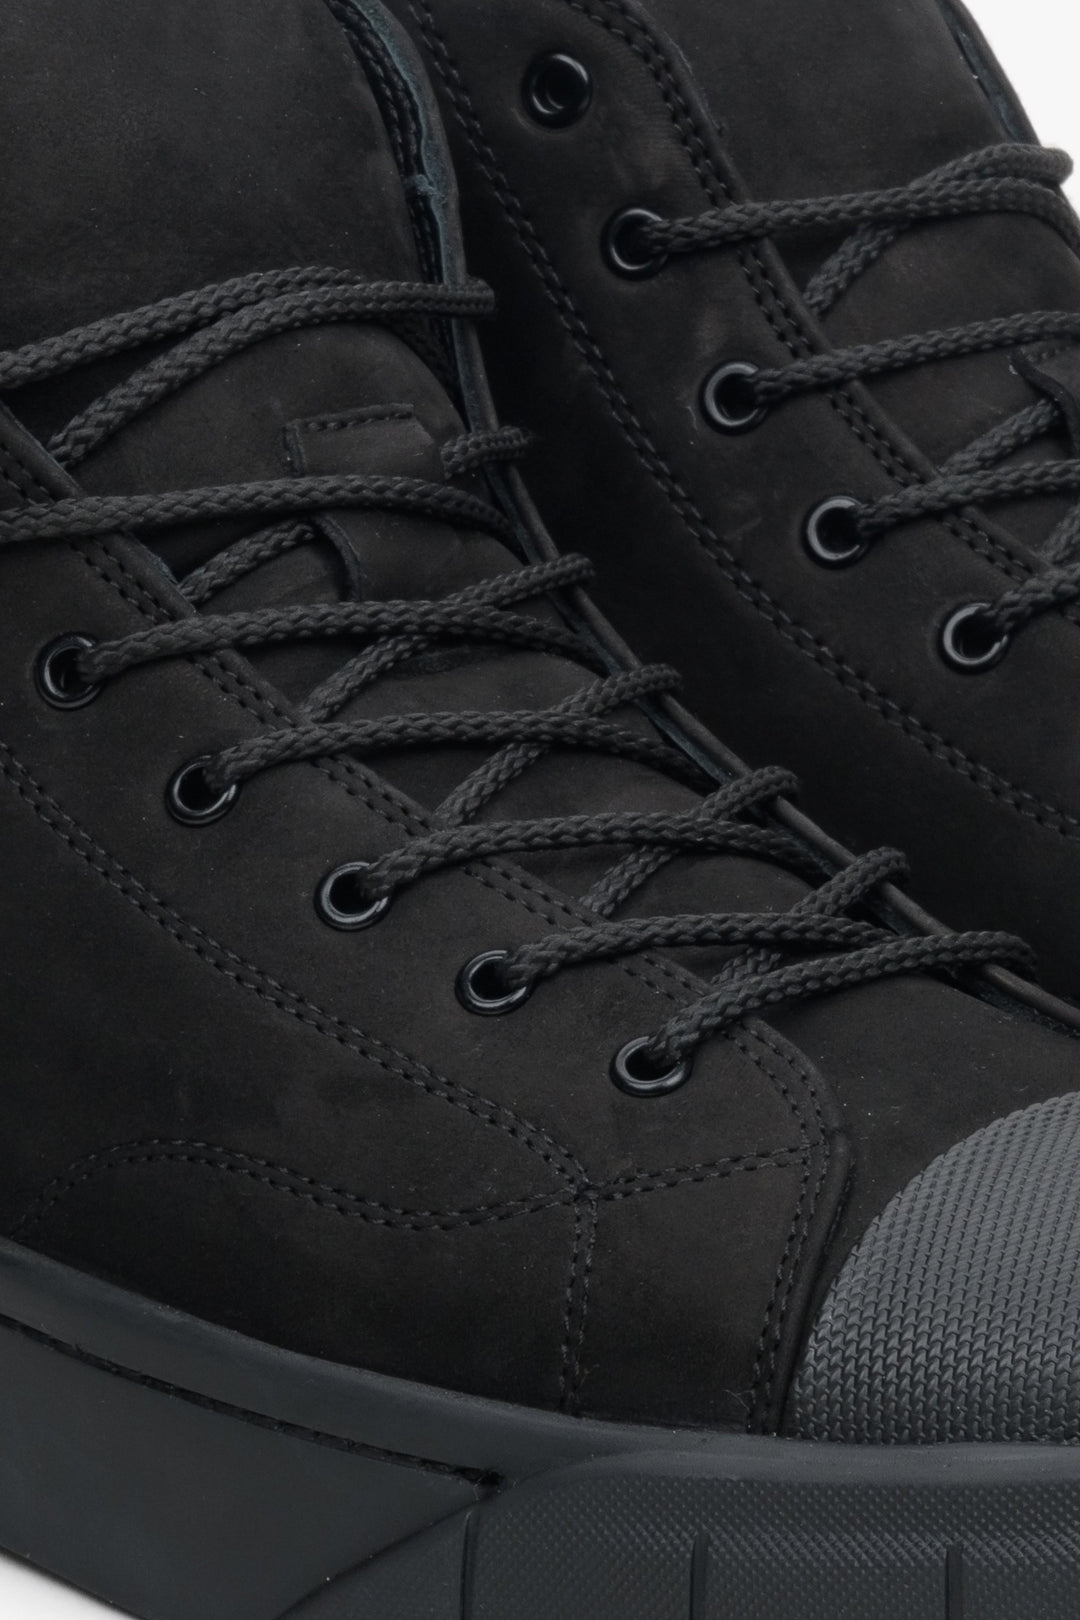 Men's high black sneakers by Estro made of natural suede - close-up on the lacing system.